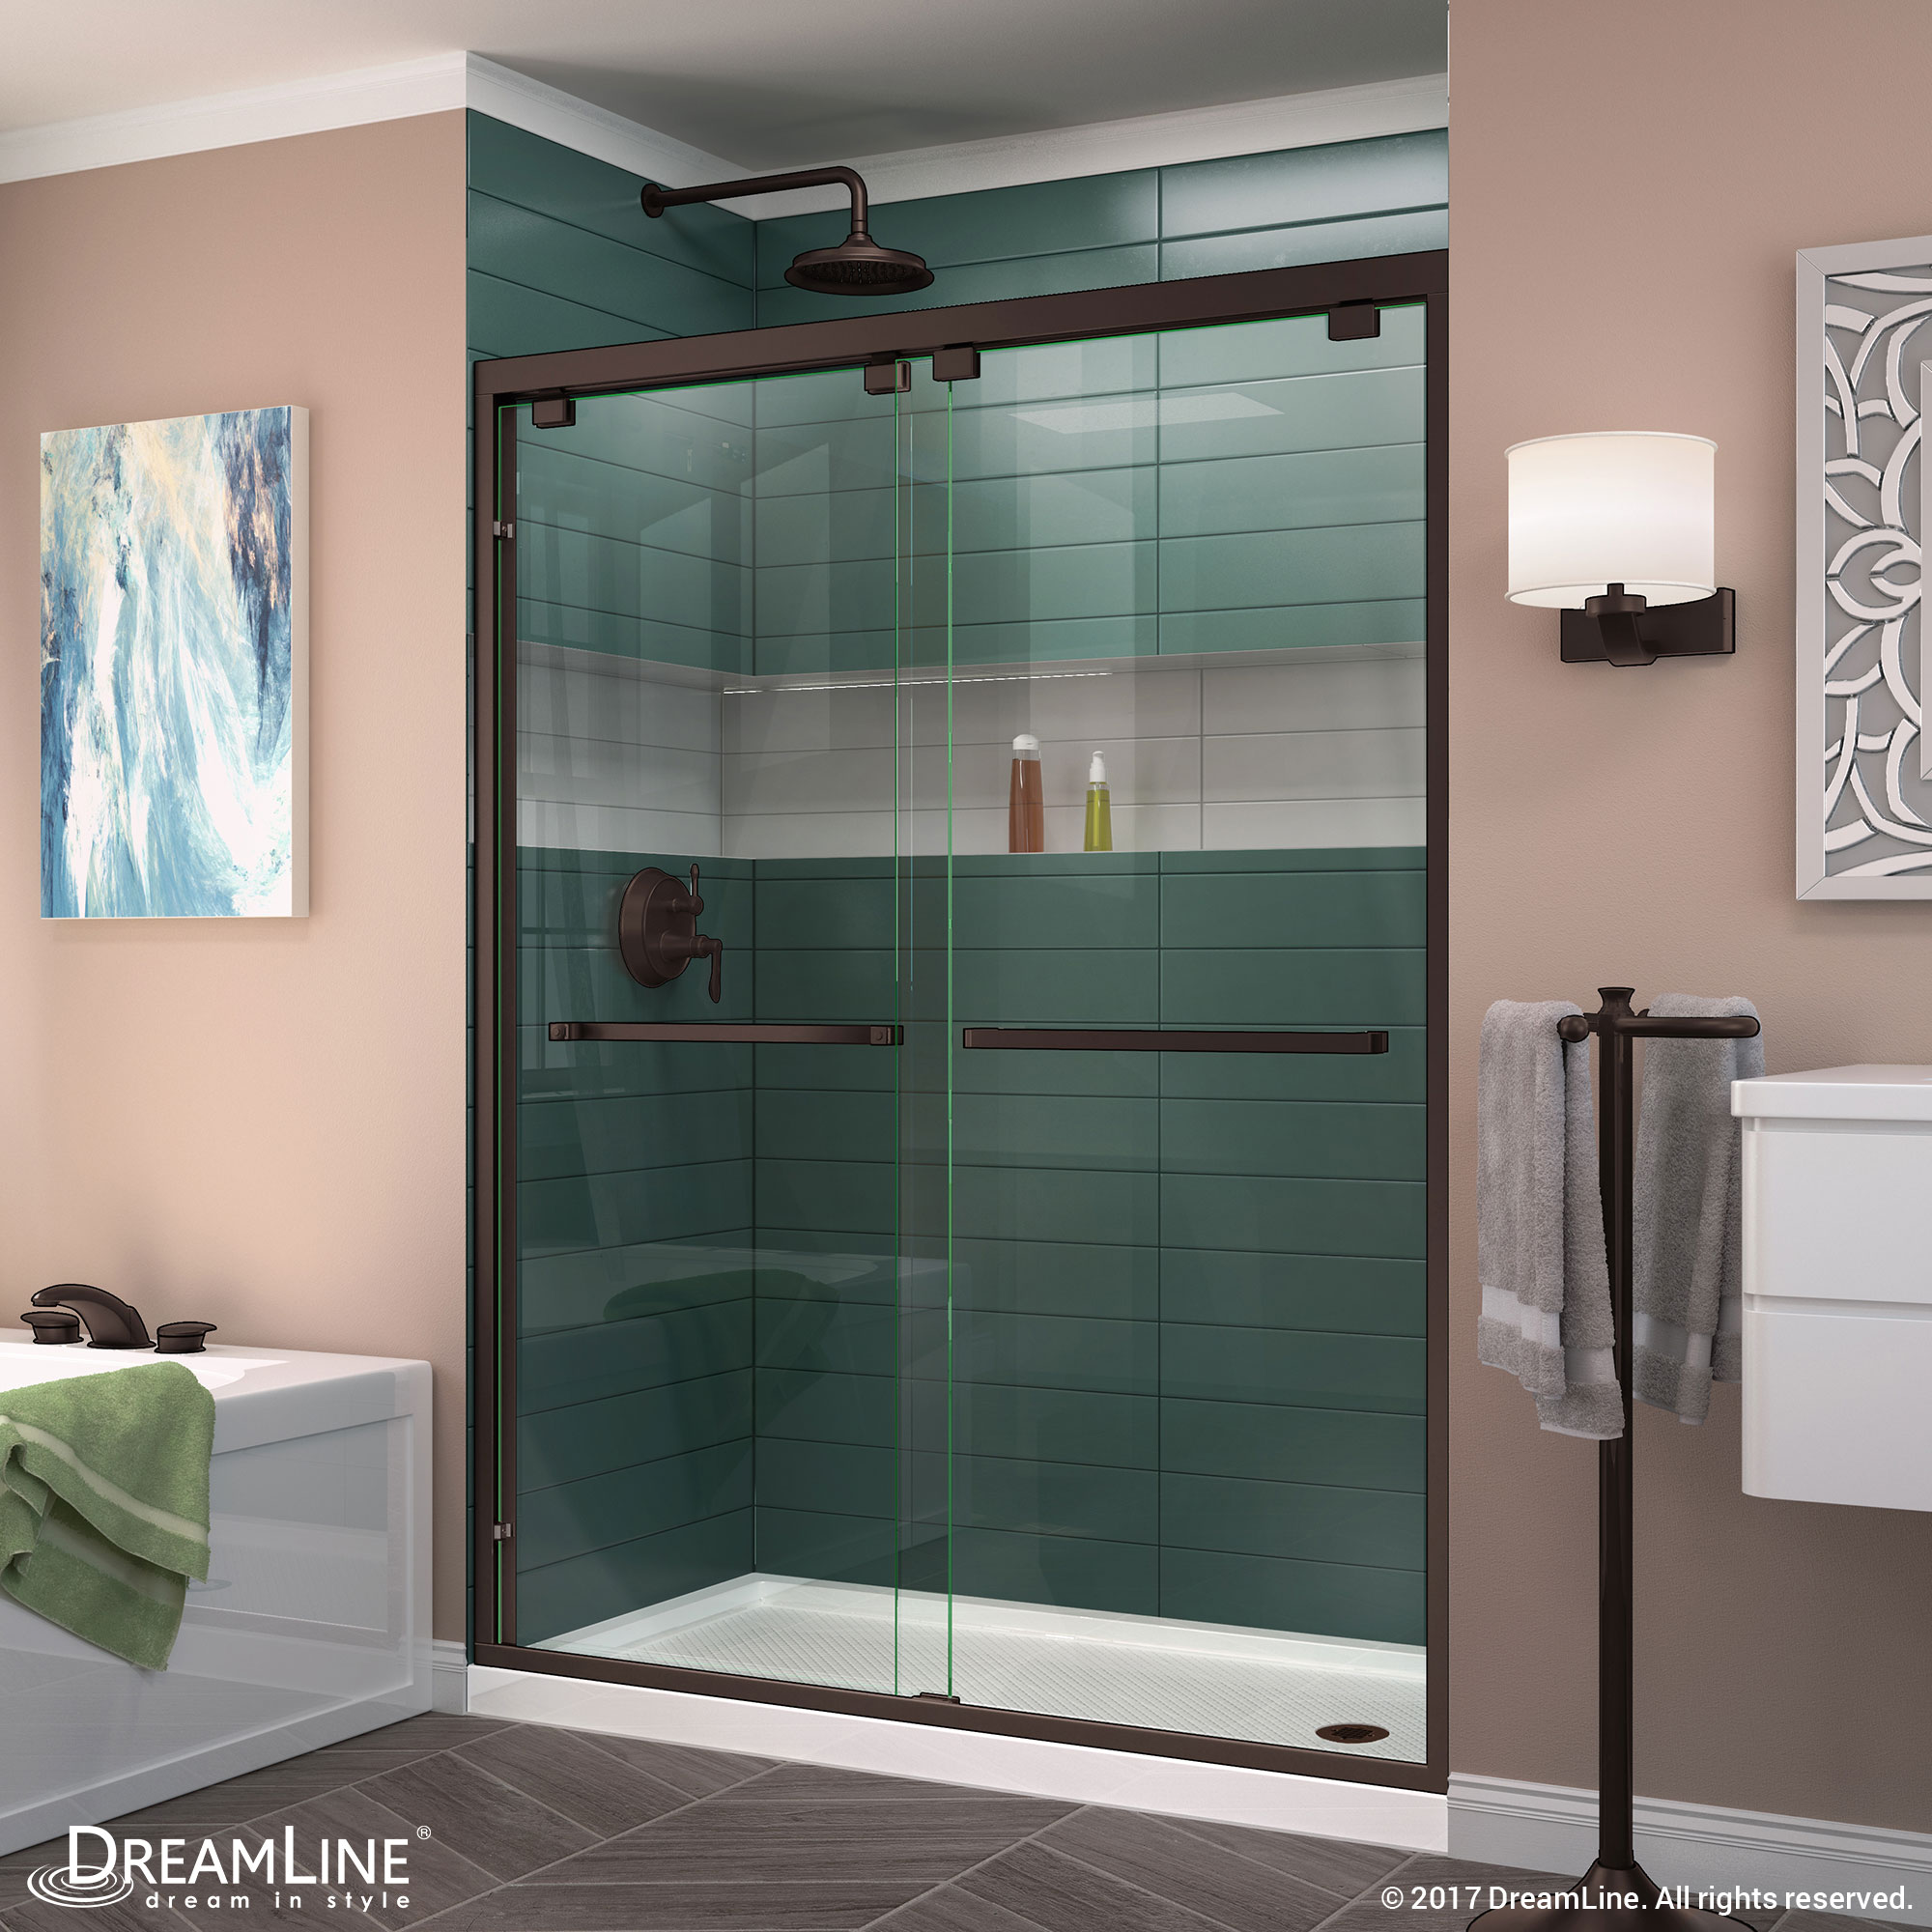 DreamLine Encore 30 in. D x 60 in. W x 78 3/4 in. H Bypass Shower Door in Brushed Nickel and Right Drain White Base Kit